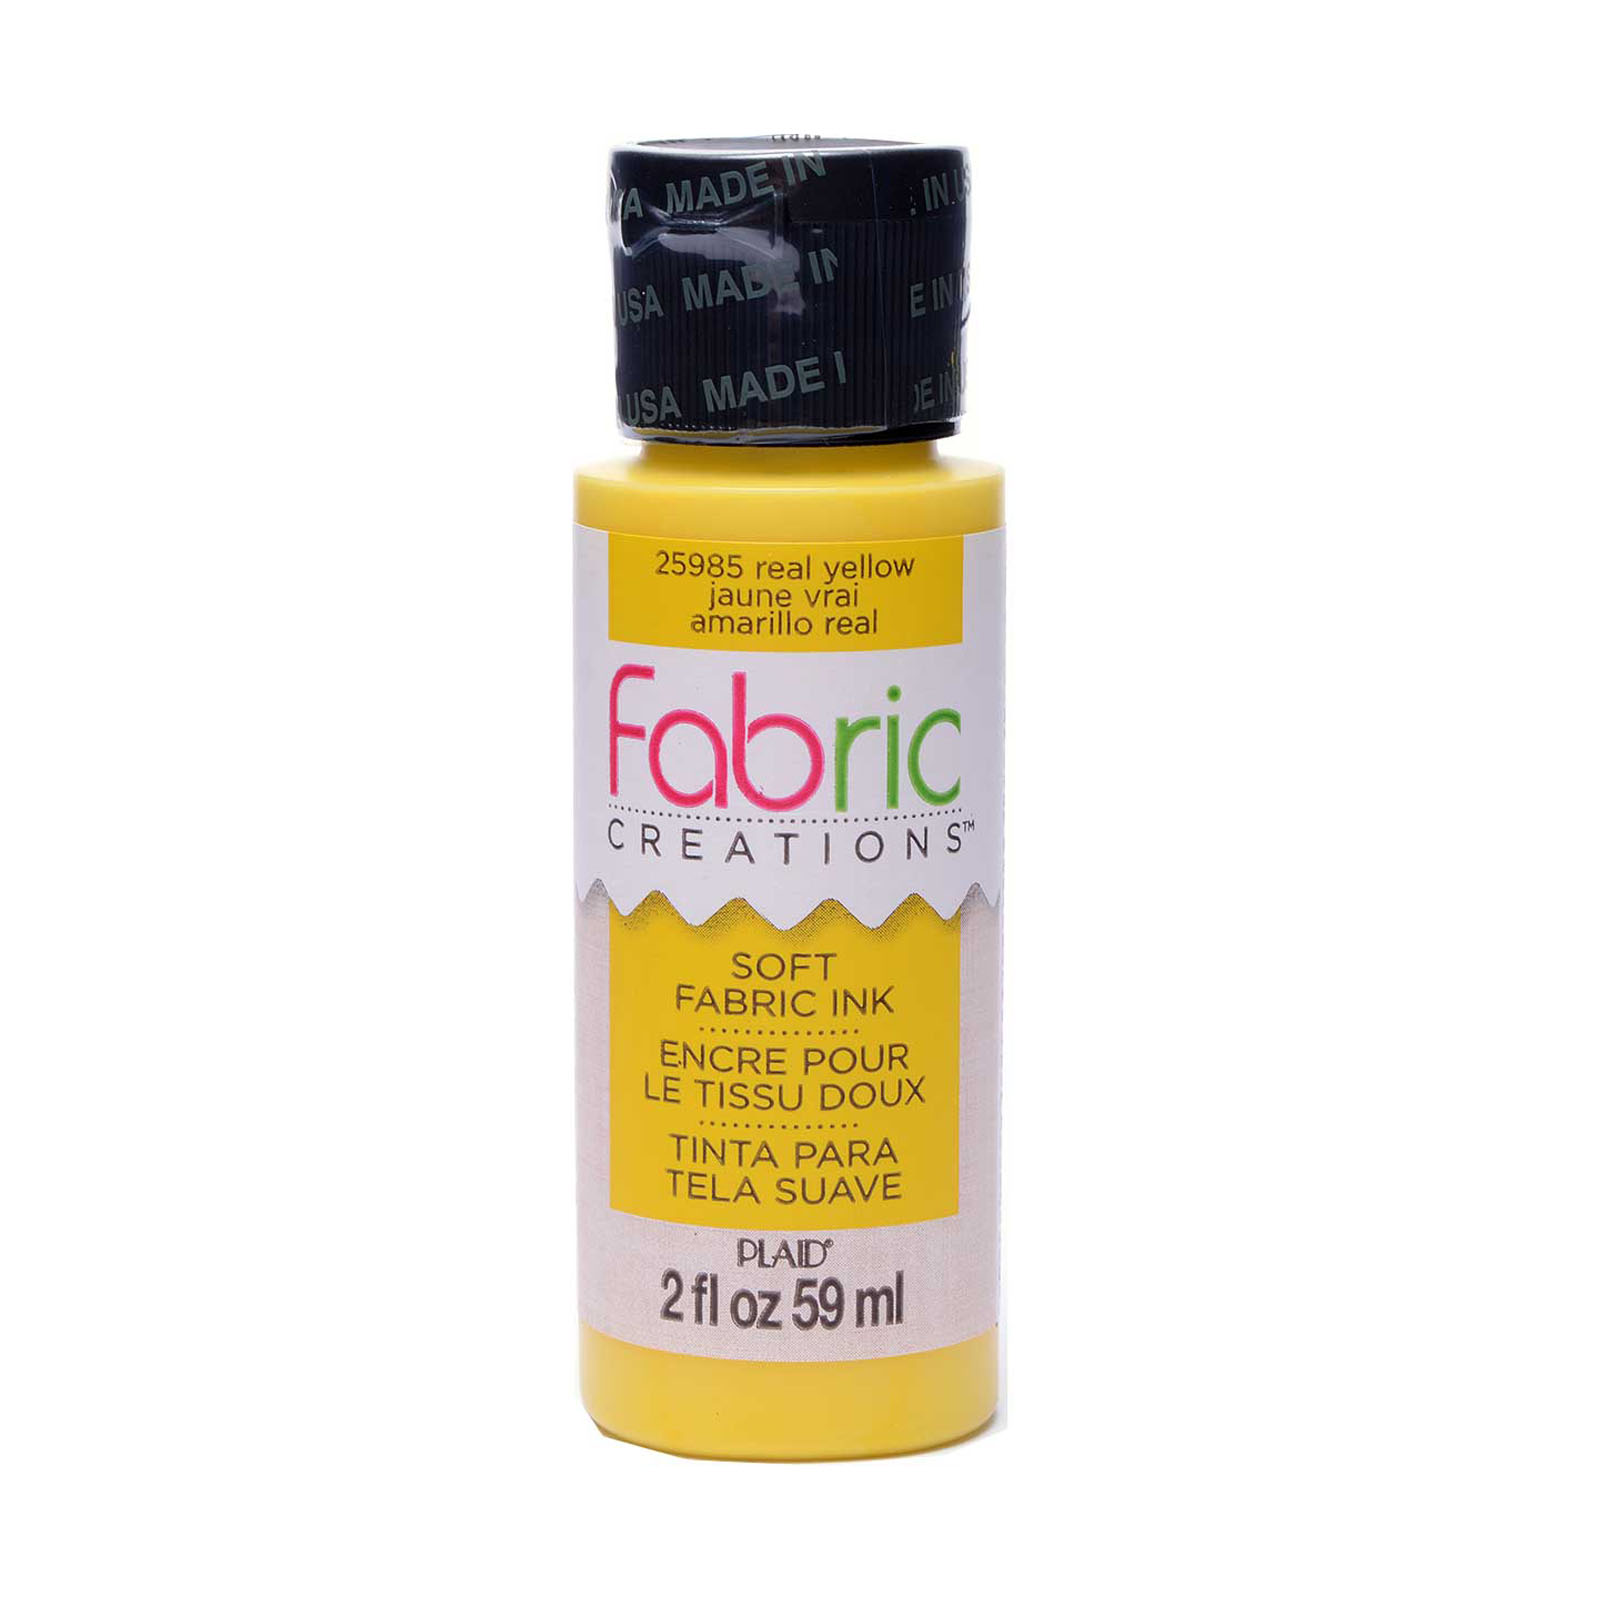 Fabric Creations • Soft fabric ink 59ml Real yellow